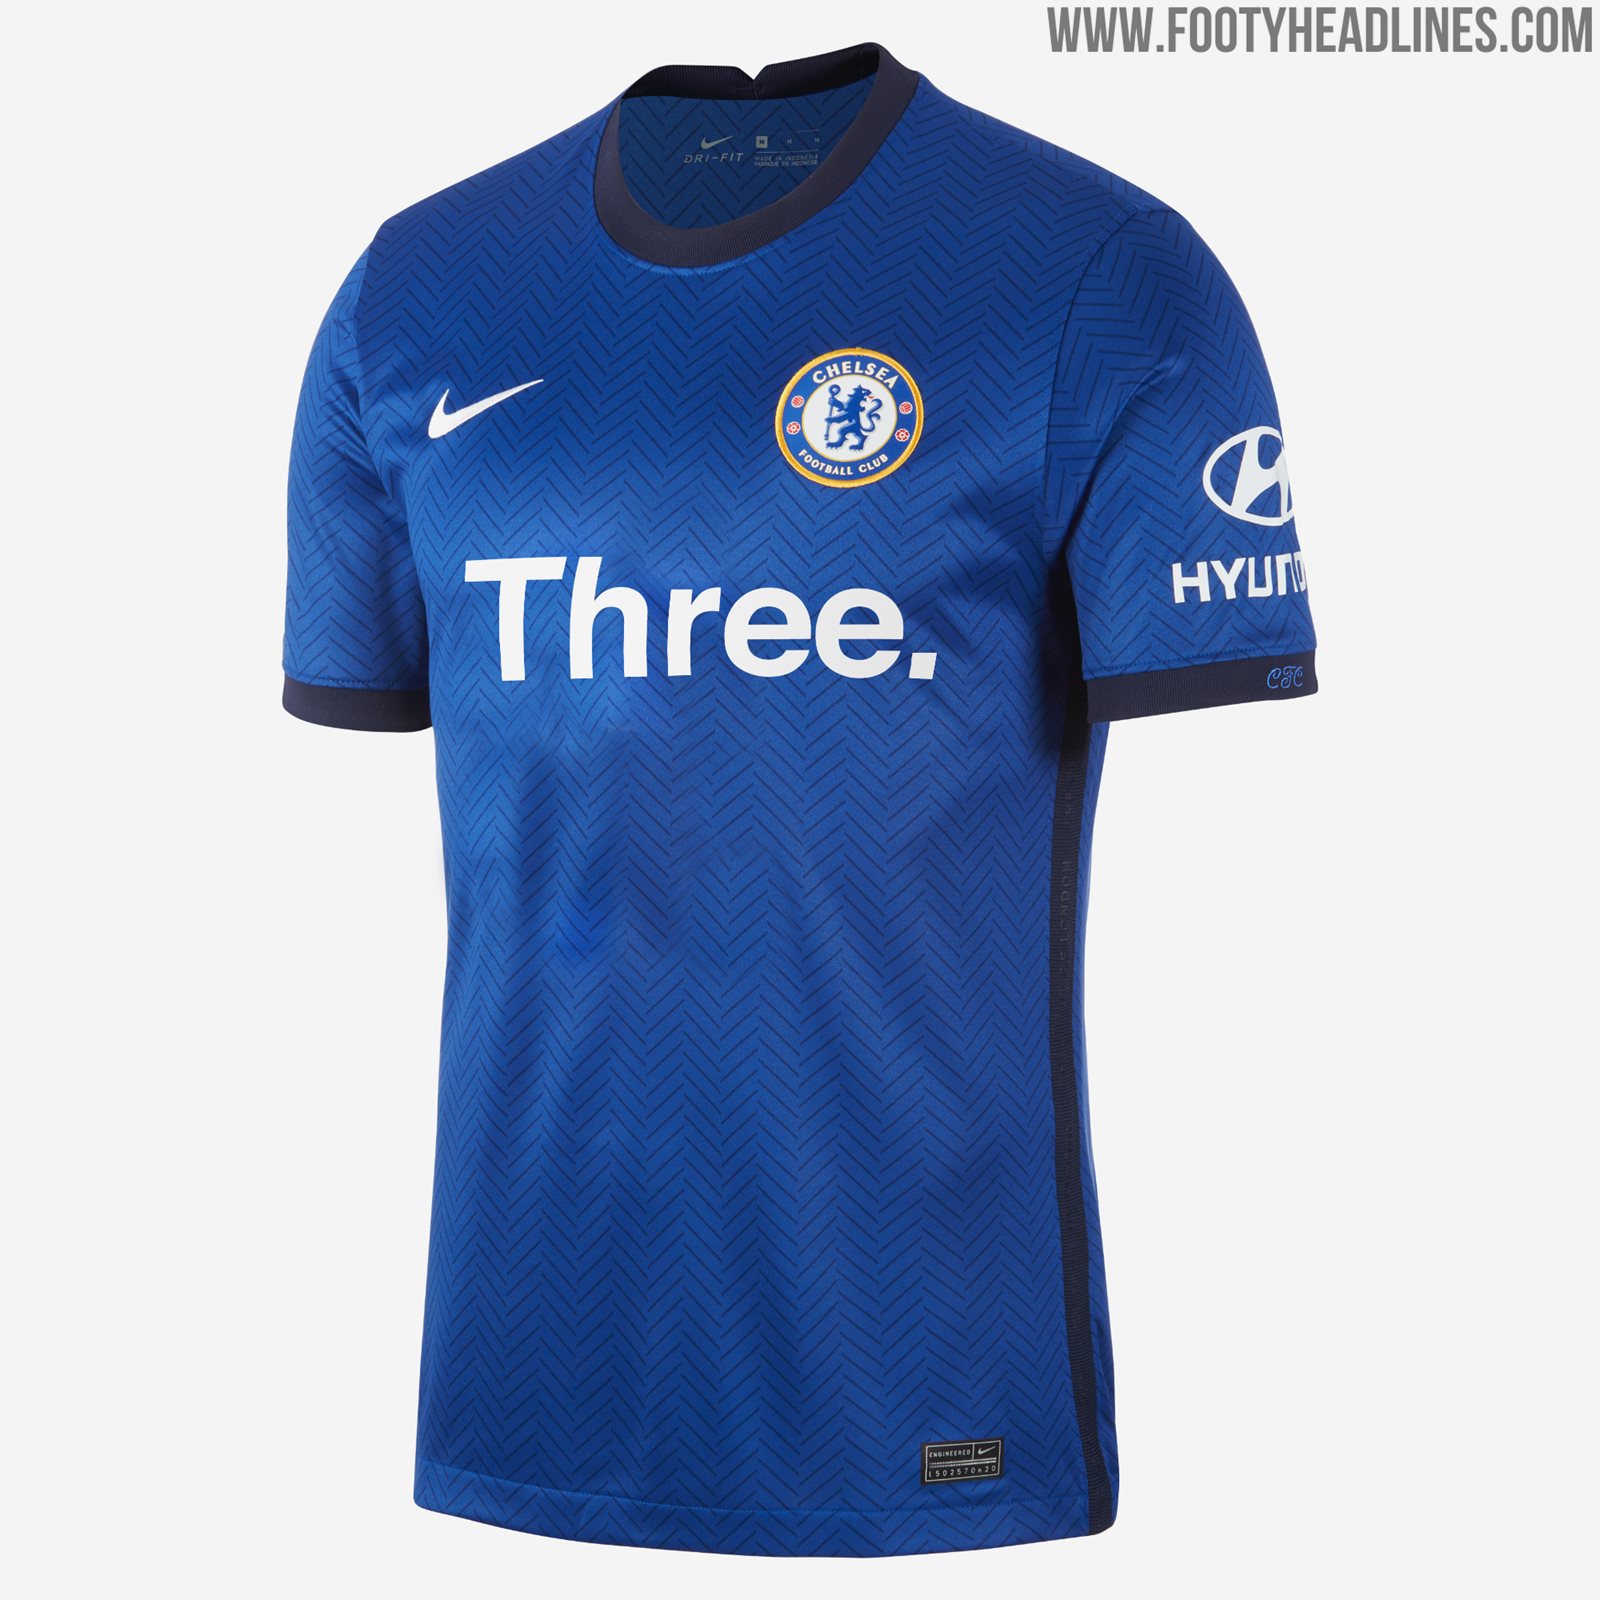 What If? Nike Chelsea 20-21 Home Kit With Alternative Sponsor(s ...